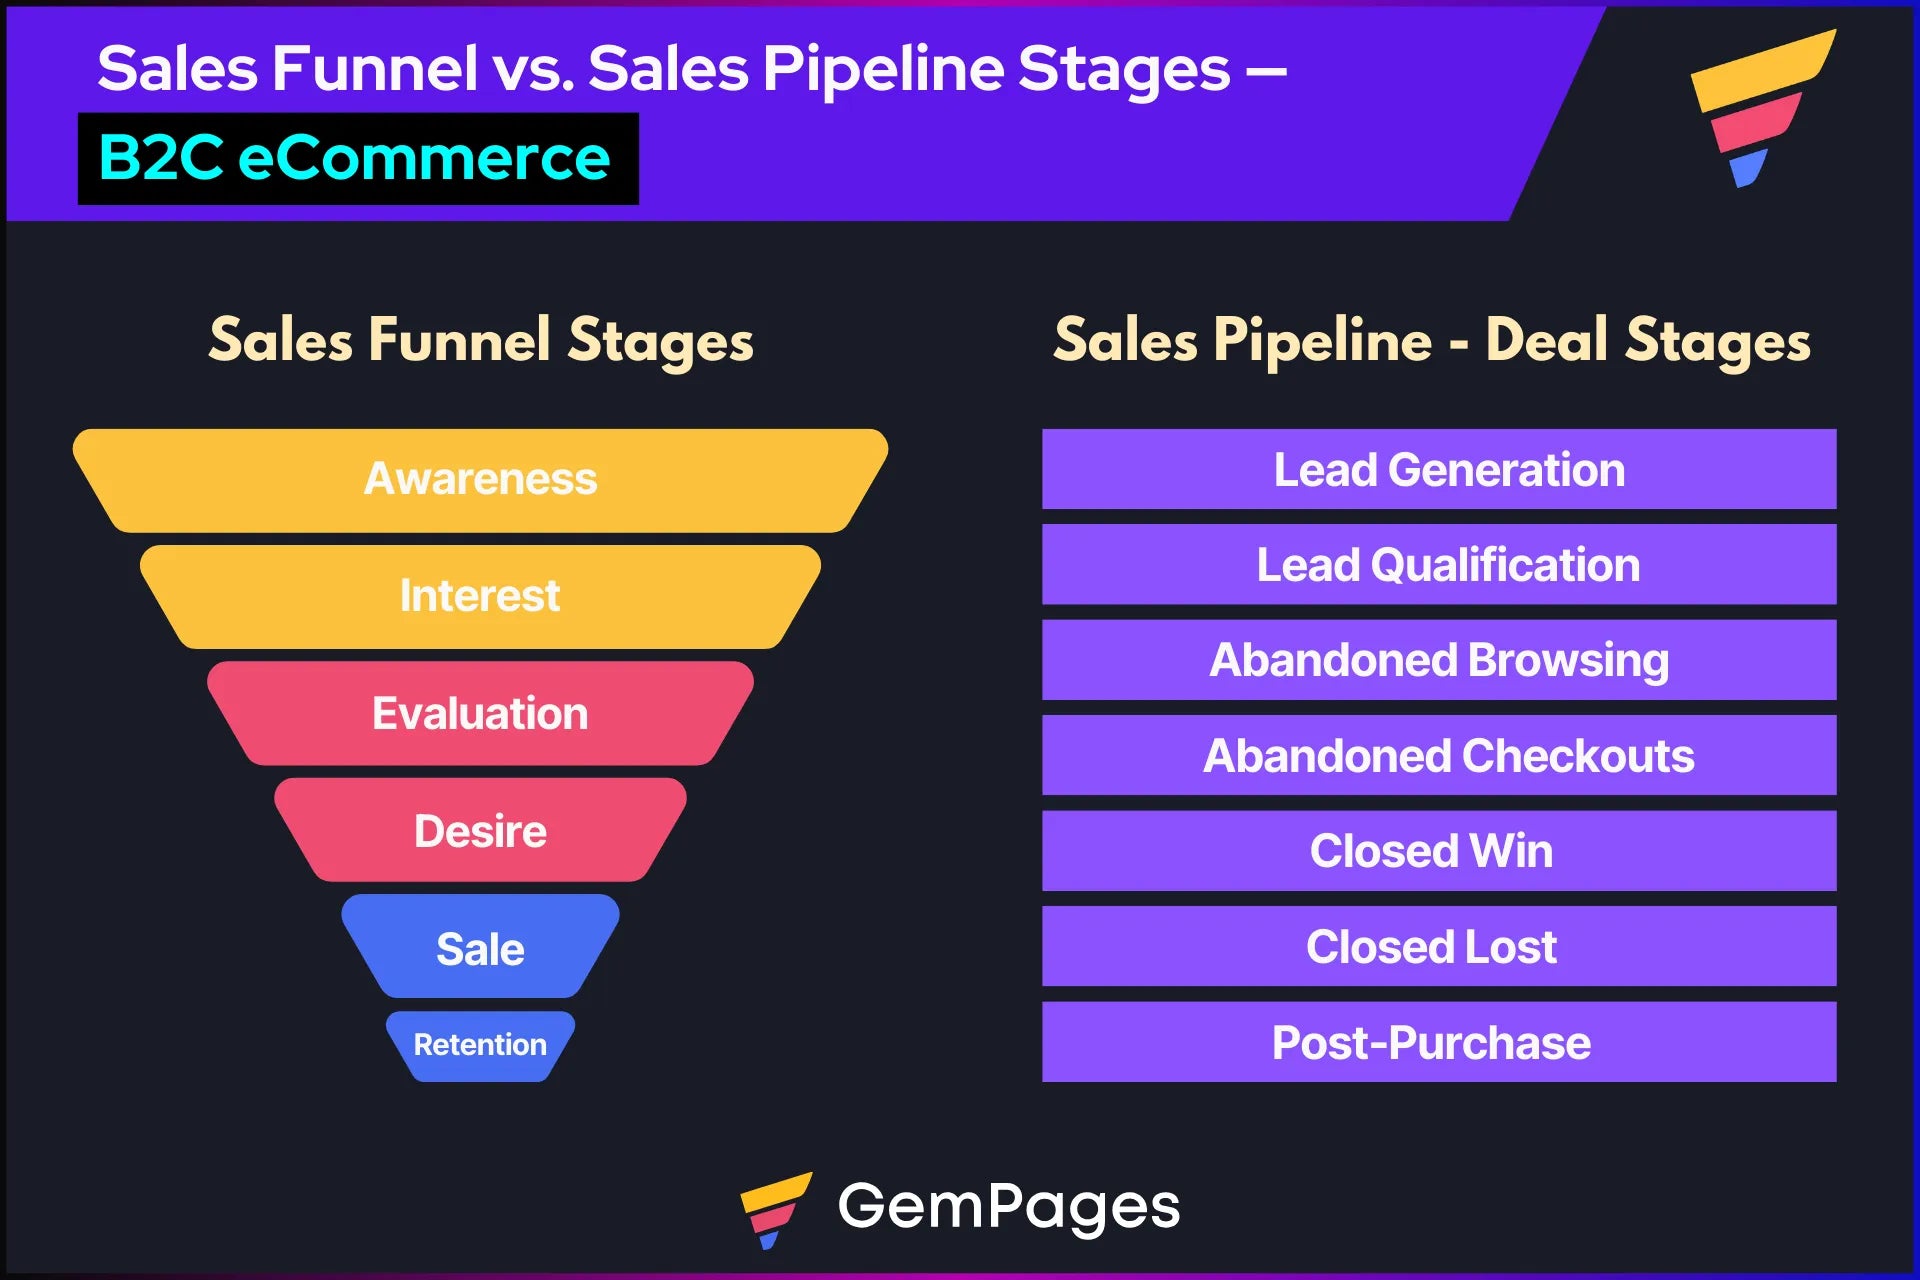 Sales funnel vs. Sales pipeline stages for B2C eCommerce